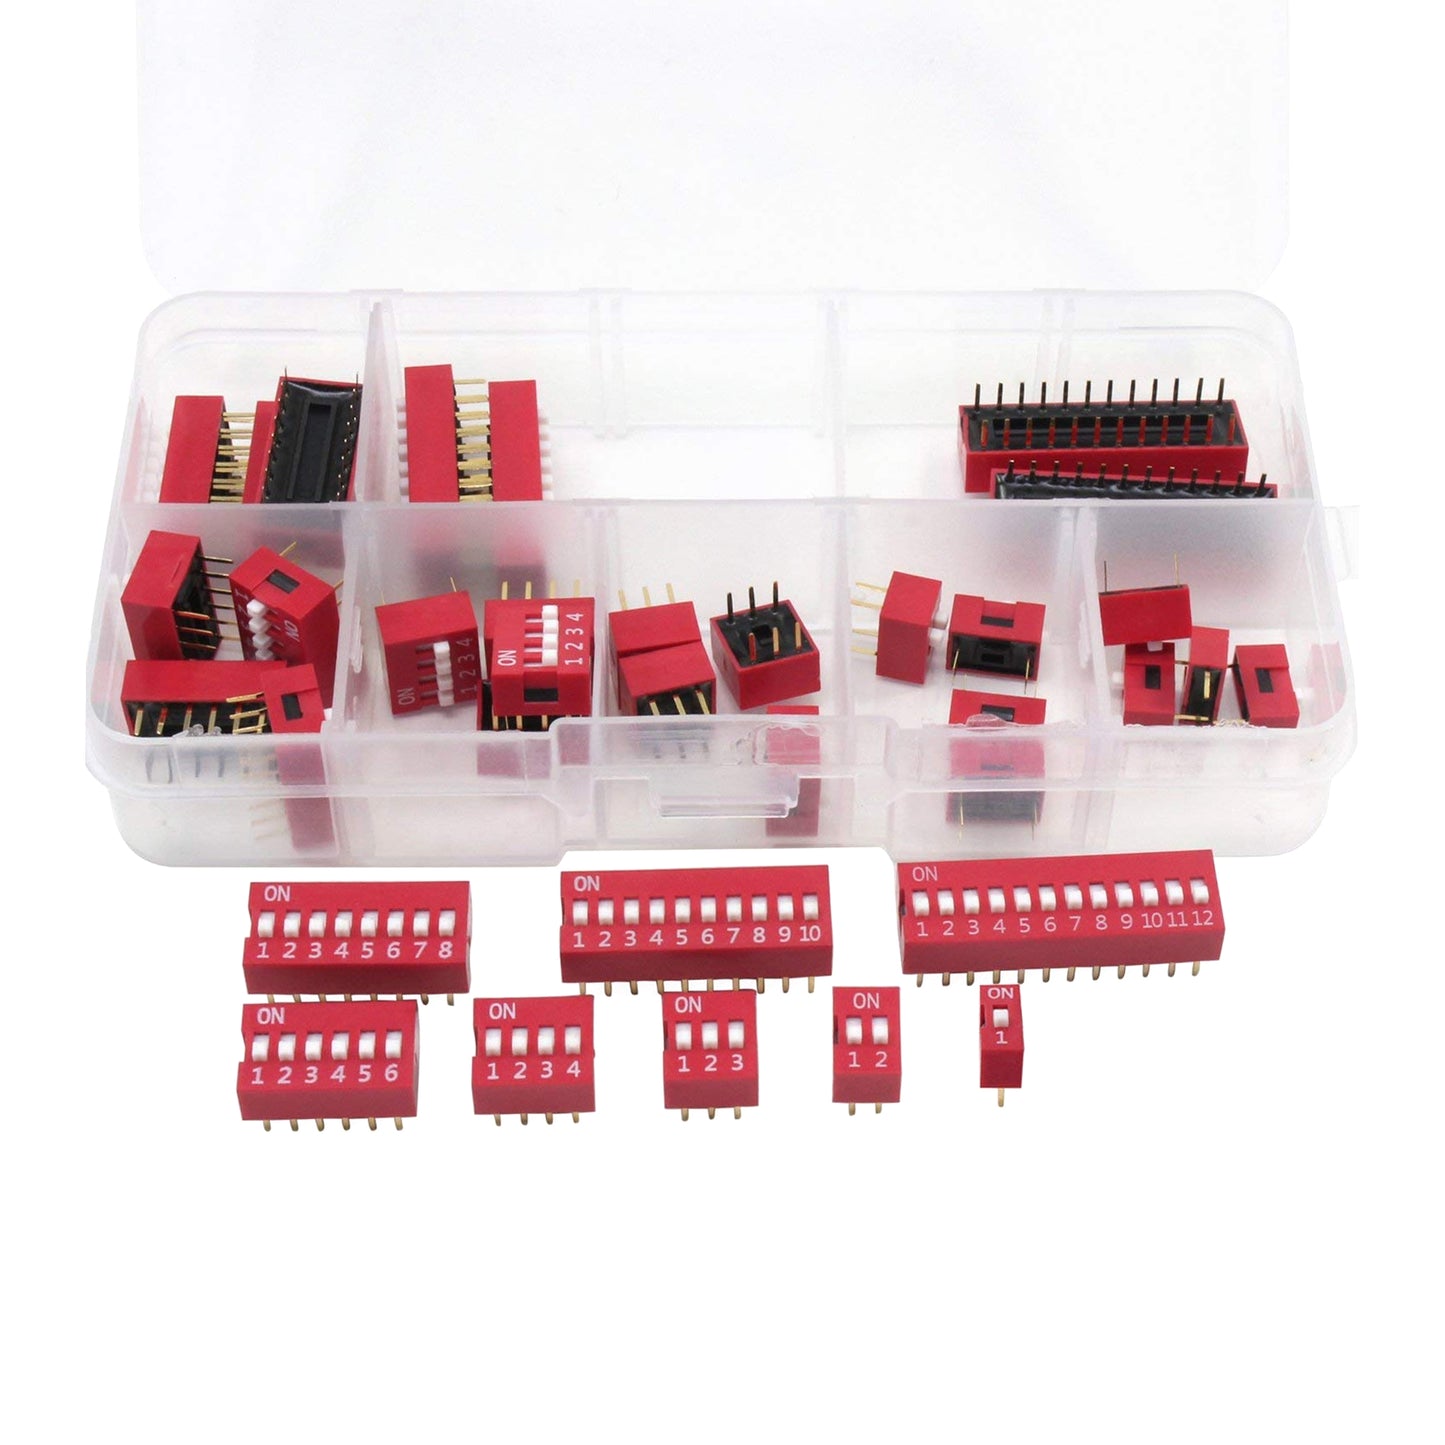 Double Row DIP Switch Assortment Kit 1, 2, 3, 4, 6, 8, 10, 12 Positions 2.54mm Pitch 35 Pieces Assorted DIP Switch Kit - RS1851 - REES52